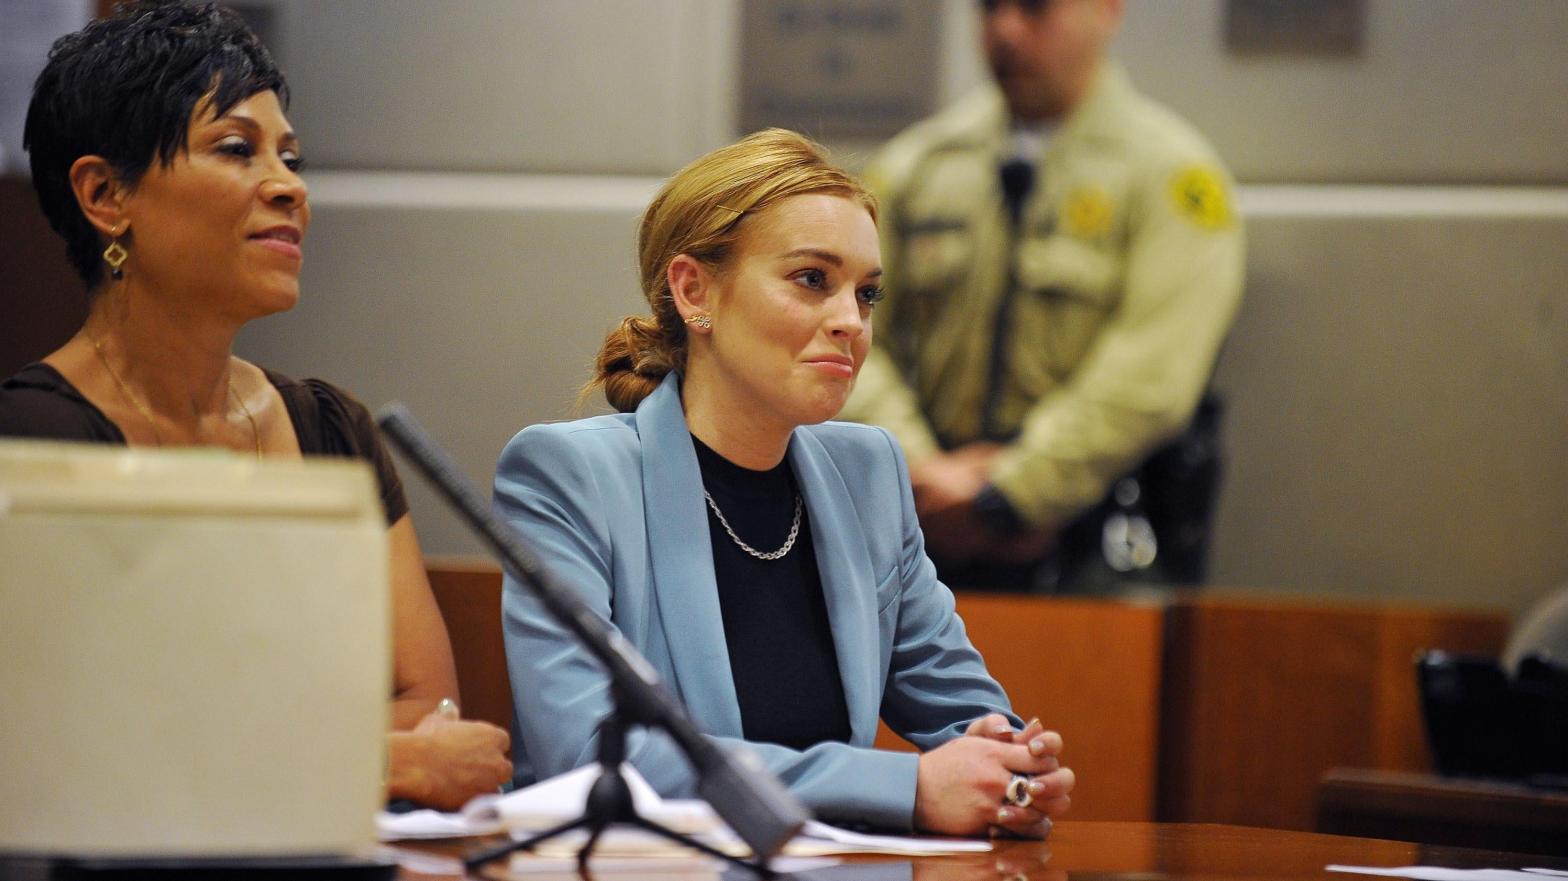 Lindsay Lohan attends her probation hearing with attorney Shawn Chapman Holley (L) at the Airport Courthouse on March 29, 2012 in Los Angeles, California. (Photo: Joe Klamer-Pool, Getty Images)